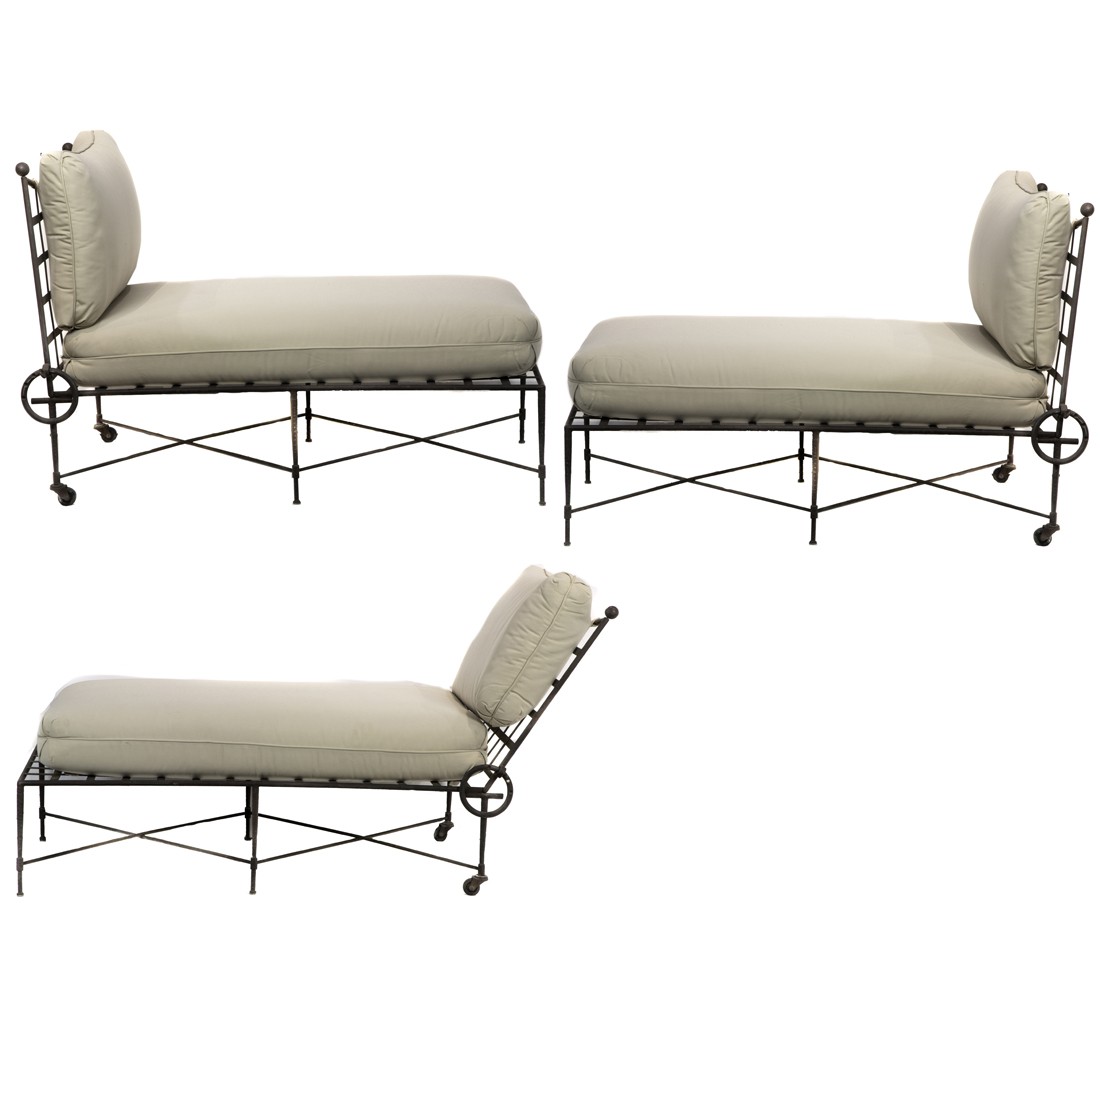 MARIO PAPPERZINI LOUNGE CHAIRS  3a25fb